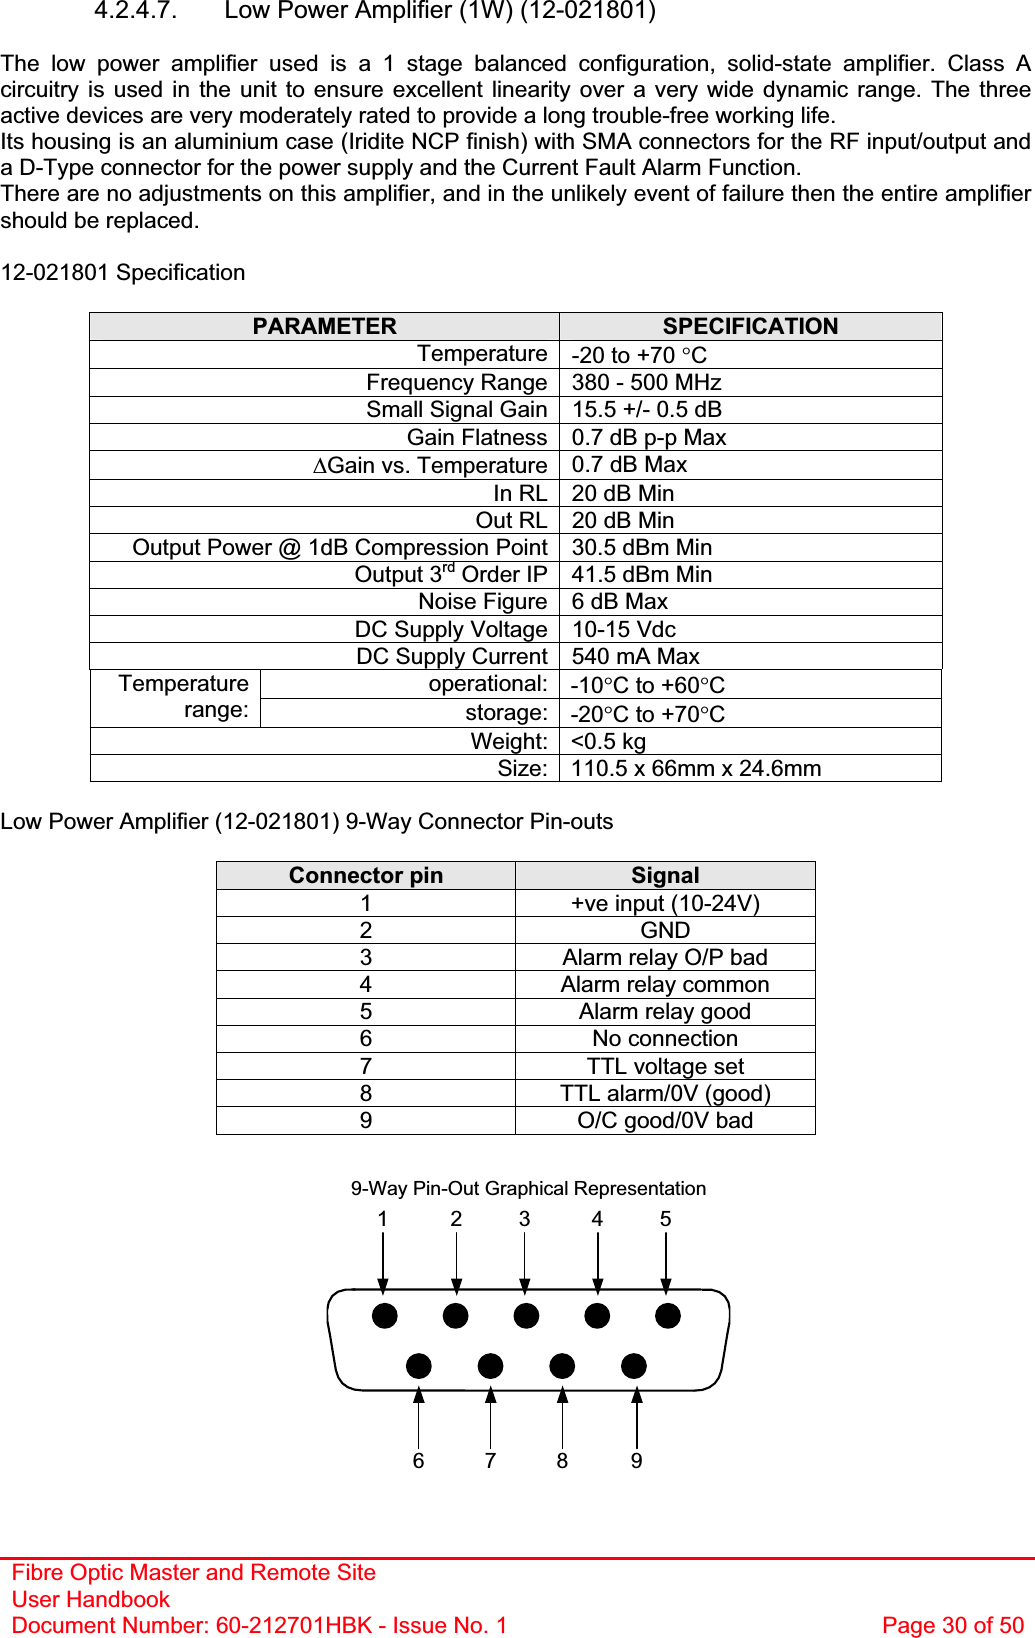 Fibre Optic Master and Remote Site User Handbook Document Number: 60-212701HBK - Issue No. 1  Page 30 of 507 8 961 2 3 4 59-Way Pin-Out Graphical Representation4.2.4.7.  Low Power Amplifier (1W) (12-021801) The low power amplifier used is a 1 stage balanced configuration, solid-state amplifier. Class A circuitry is used in the unit to ensure excellent linearity over a very wide dynamic range. The three active devices are very moderately rated to provide a long trouble-free working life.Its housing is an aluminium case (Iridite NCP finish) with SMA connectors for the RF input/output and a D-Type connector for the power supply and the Current Fault Alarm Function. There are no adjustments on this amplifier, and in the unlikely event of failure then the entire amplifier should be replaced. 12-021801 Specification PARAMETER SPECIFICATIONTemperature -20 to +70 qCFrequency Range 380 - 500 MHz Small Signal Gain 15.5 +/- 0.5 dB Gain Flatness 0.7 dB p-p Max &apos;Gain vs. Temperature 0.7 dB Max In RL 20 dB Min Out RL 20 dB Min Output Power @ 1dB Compression Point 30.5 dBm Min Output 3rd Order IP 41.5 dBm Min Noise Figure 6 dB Max DC Supply Voltage 10-15 Vdc DC Supply Current  540 mA Max operational: -10qC to +60qCTemperaturerange: storage: -20qC to +70qCWeight: &lt;0.5 kg Size: 110.5 x 66mm x 24.6mm Low Power Amplifier (12-021801) 9-Way Connector Pin-outs Connector pin  Signal1  +ve input (10-24V) 2 GND 3  Alarm relay O/P bad 4  Alarm relay common 5  Alarm relay good 6 No connection 7  TTL voltage set 8  TTL alarm/0V (good) 9  O/C good/0V bad 